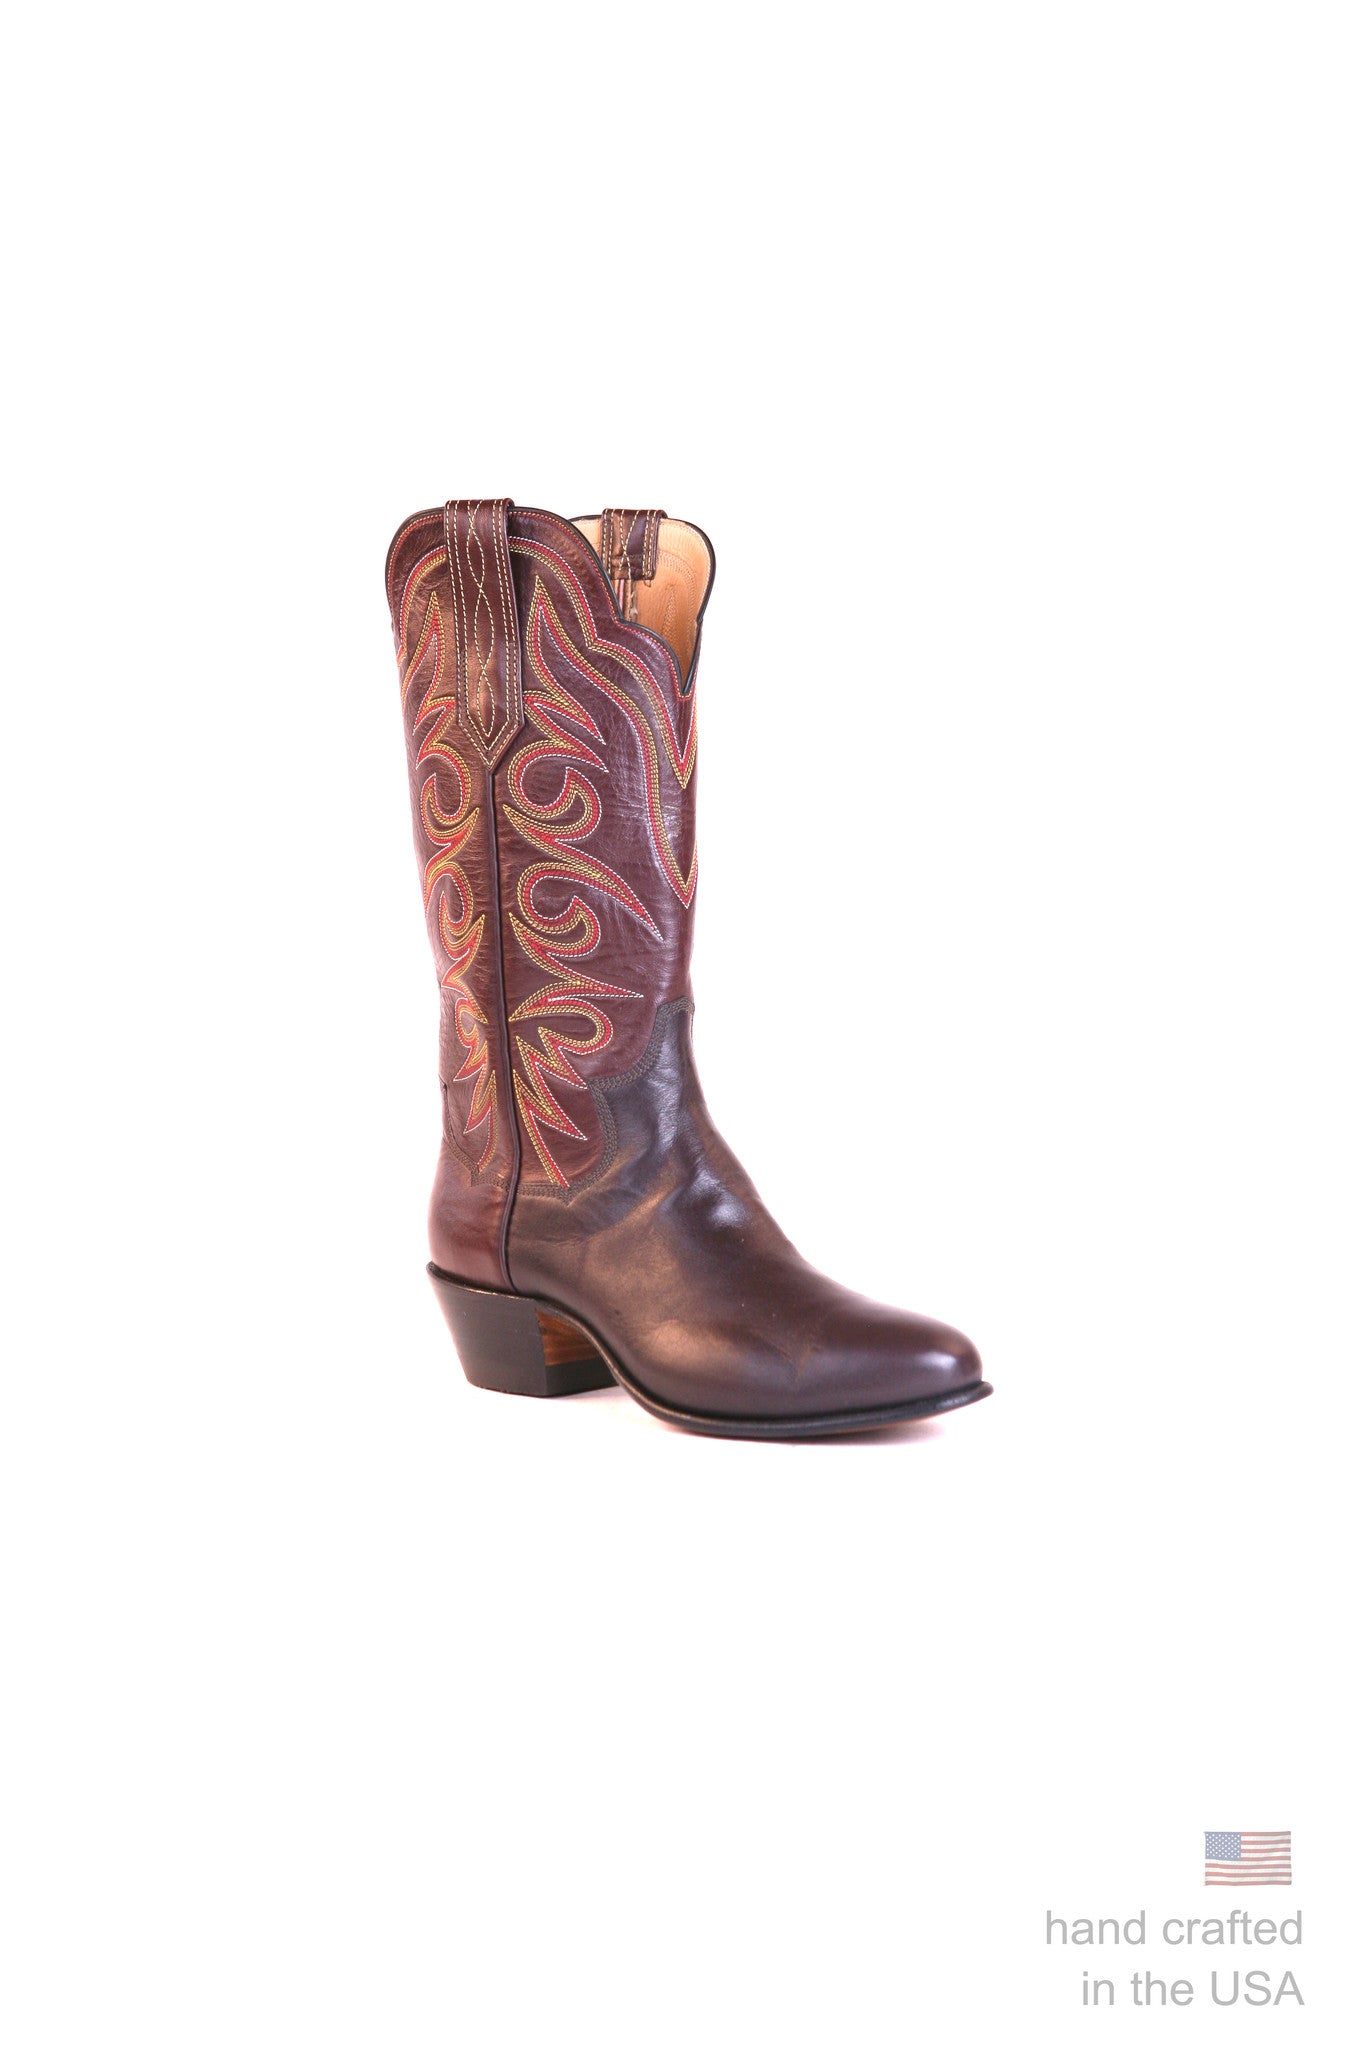 Singles: Boot 0062: Size 6.5 A